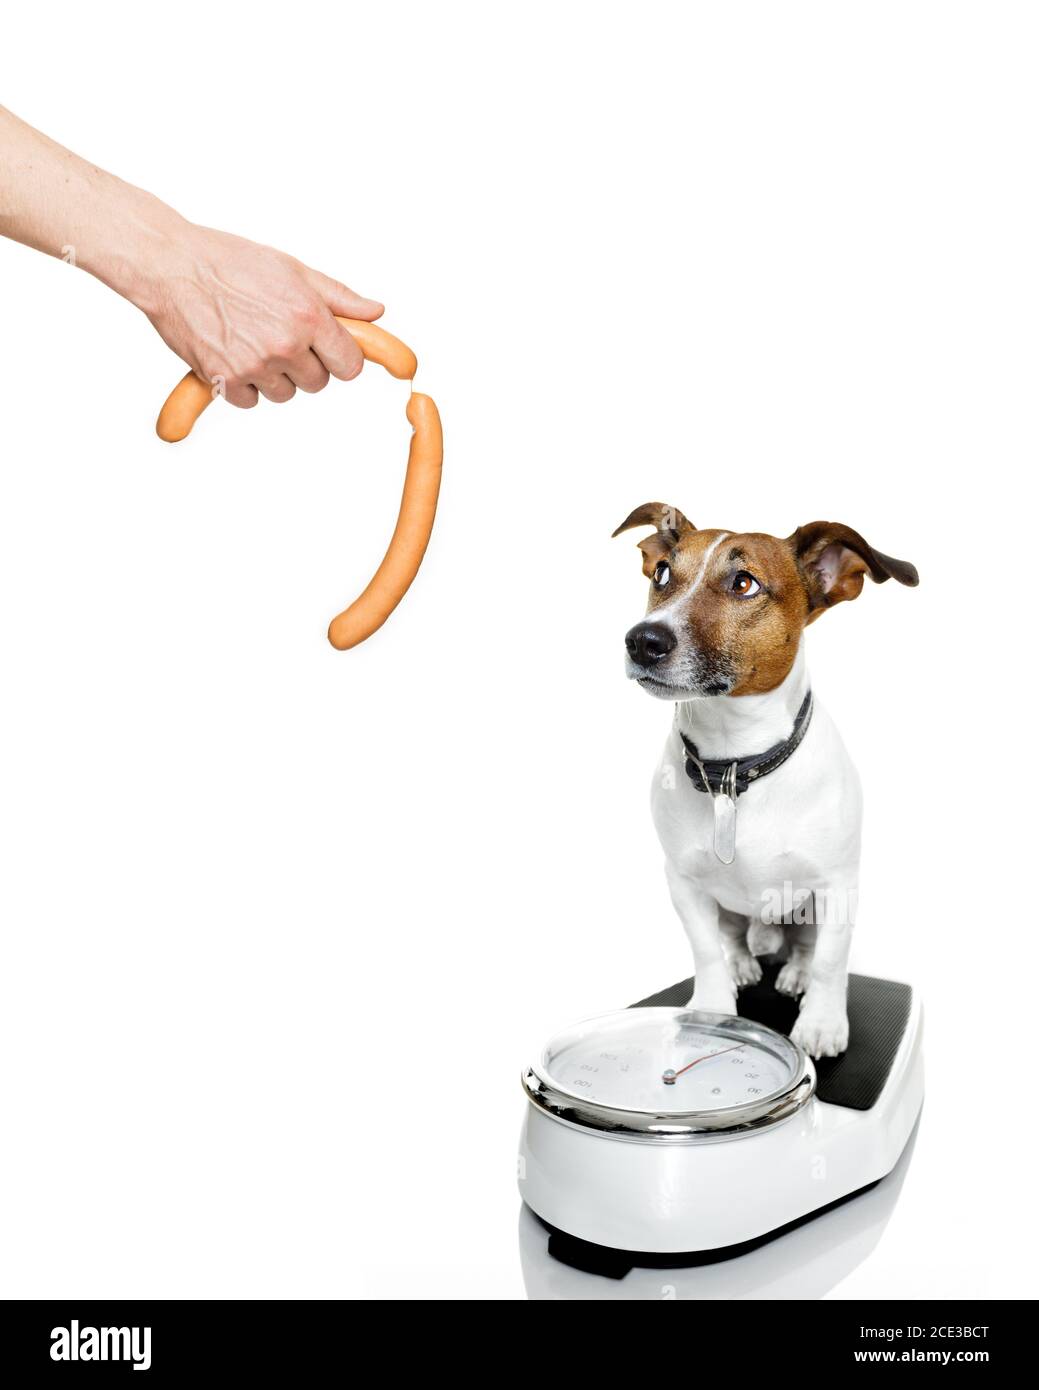 Dog dish on scale Cut Out Stock Images & Pictures - Alamy